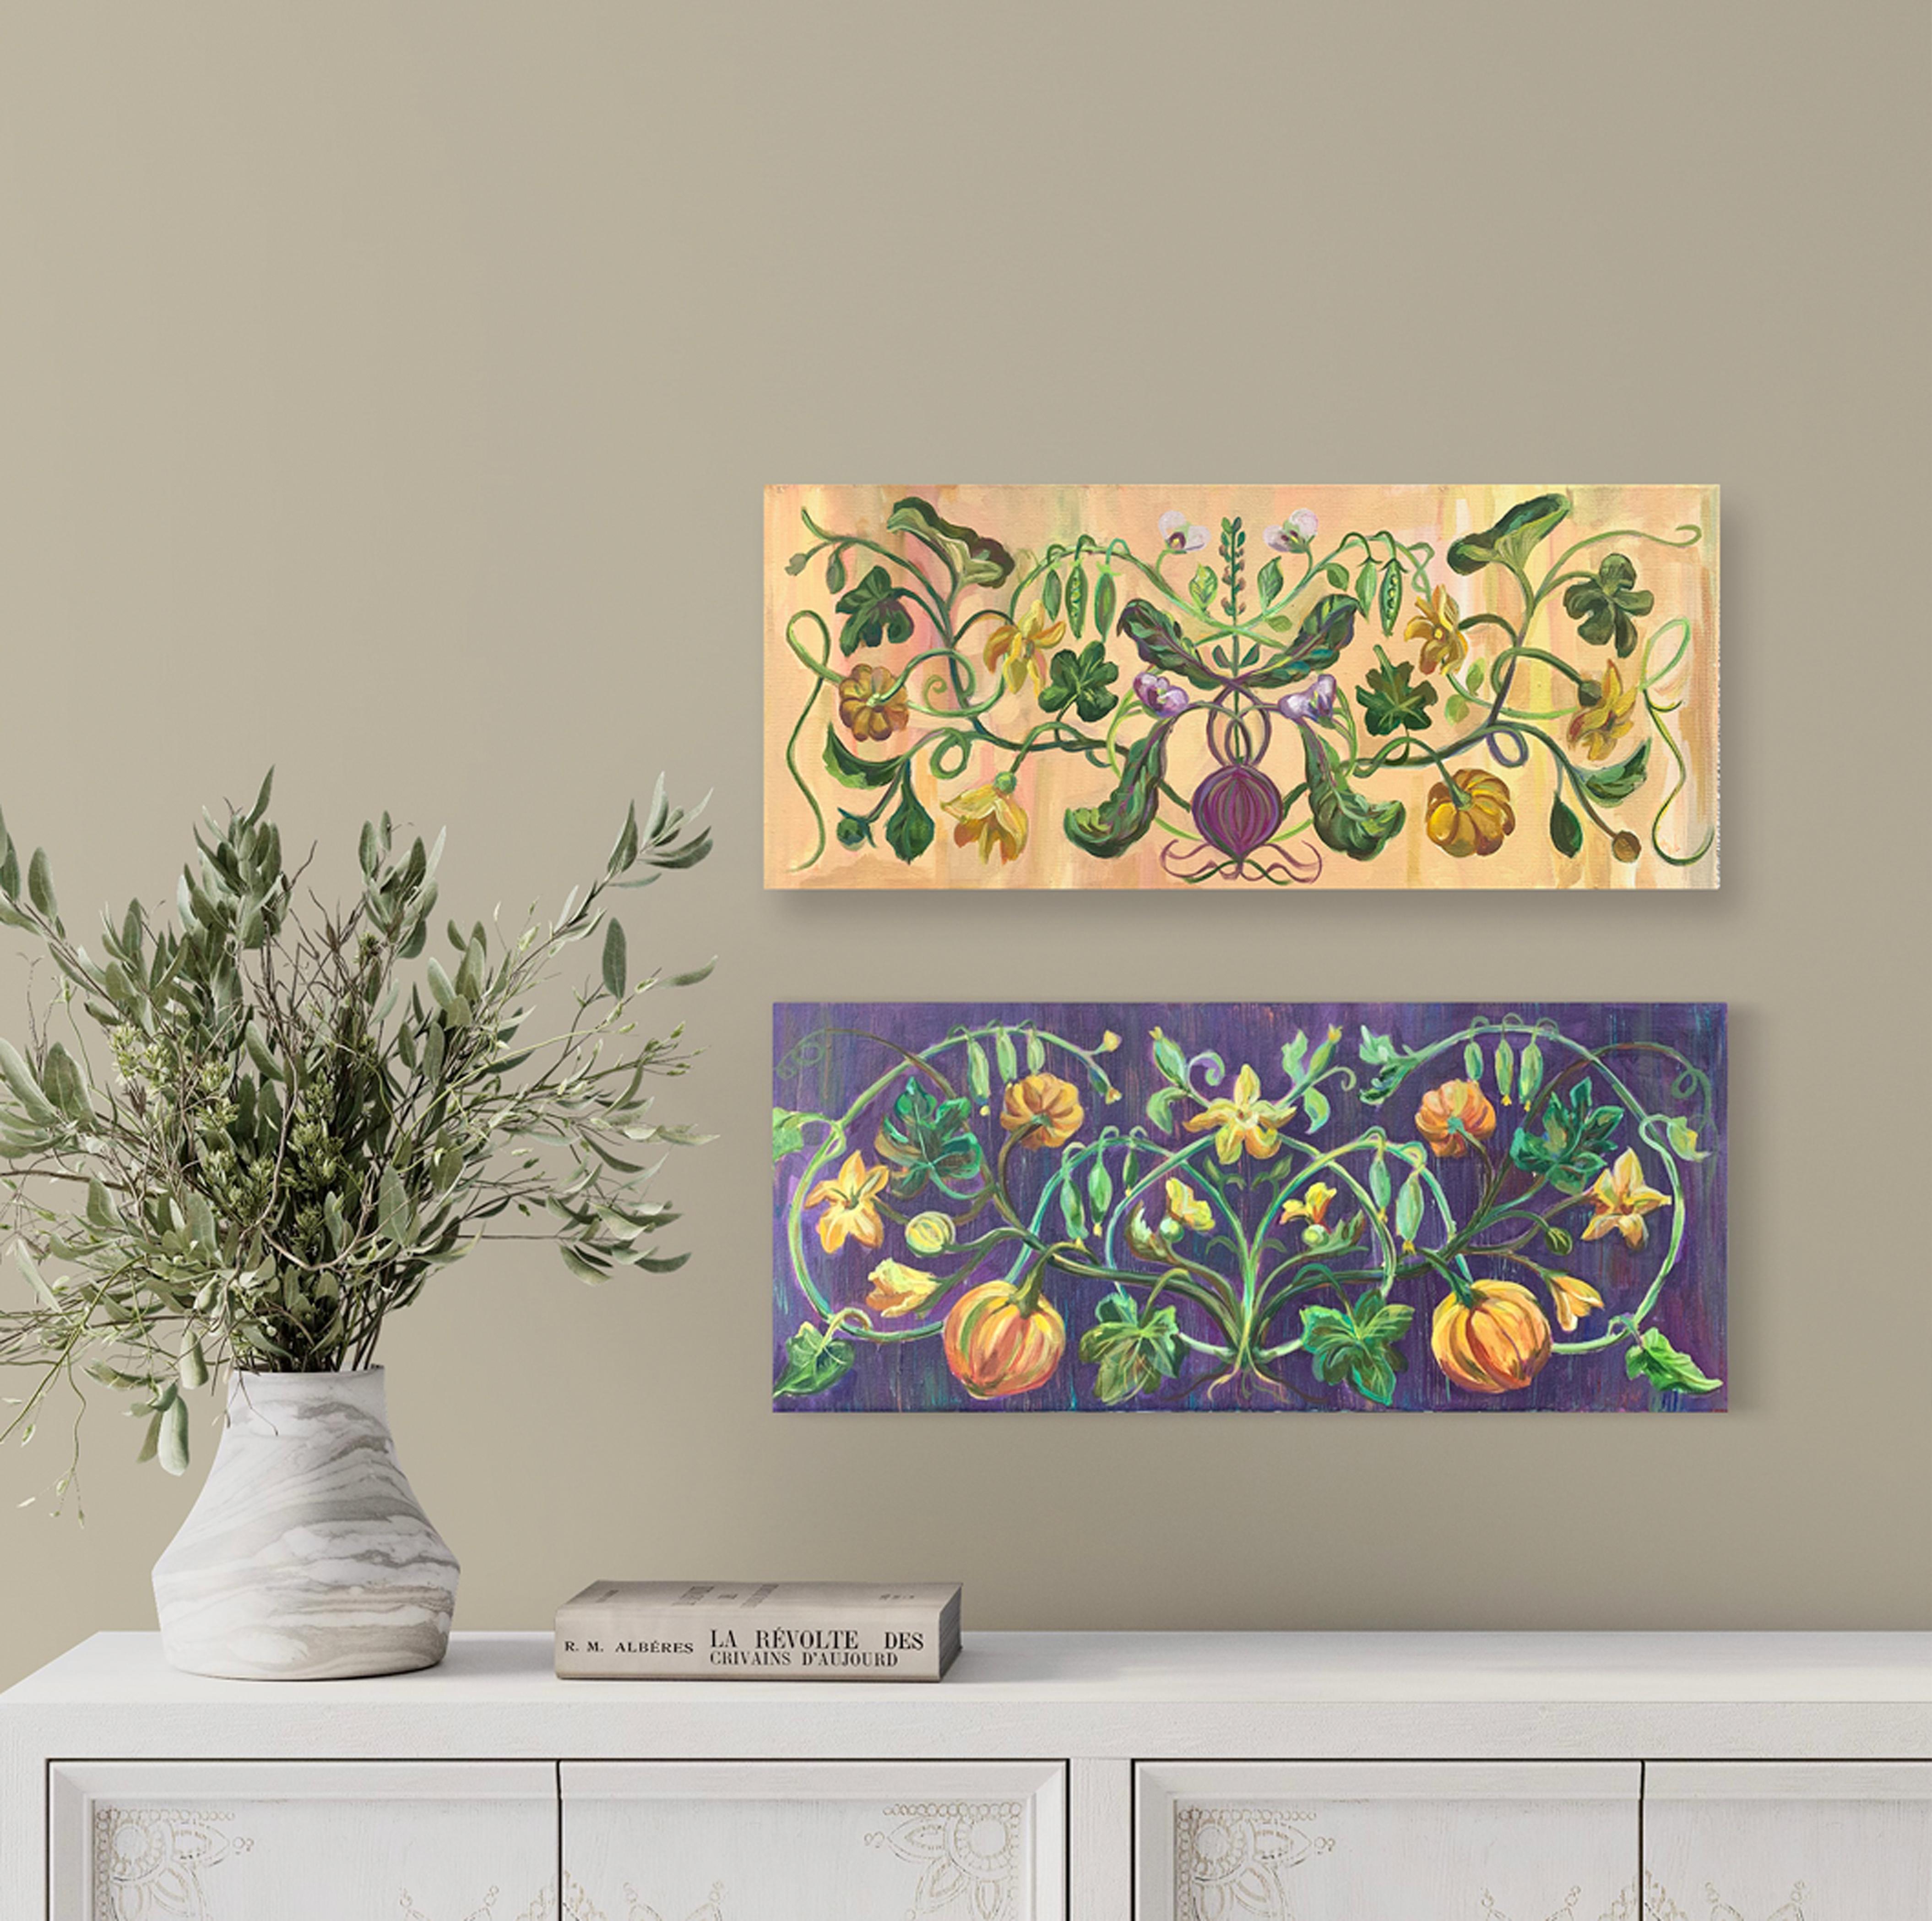 an exquisite vintage pattern of climbing plants and vegetables creating a colourful contrast on a dark purple background and beige . Diptych 

  - Original oil painting - 70х30 cm each painting  (27.6 W x 11.8 H x 0.4 D in)
 - 0.4 inch thick galley